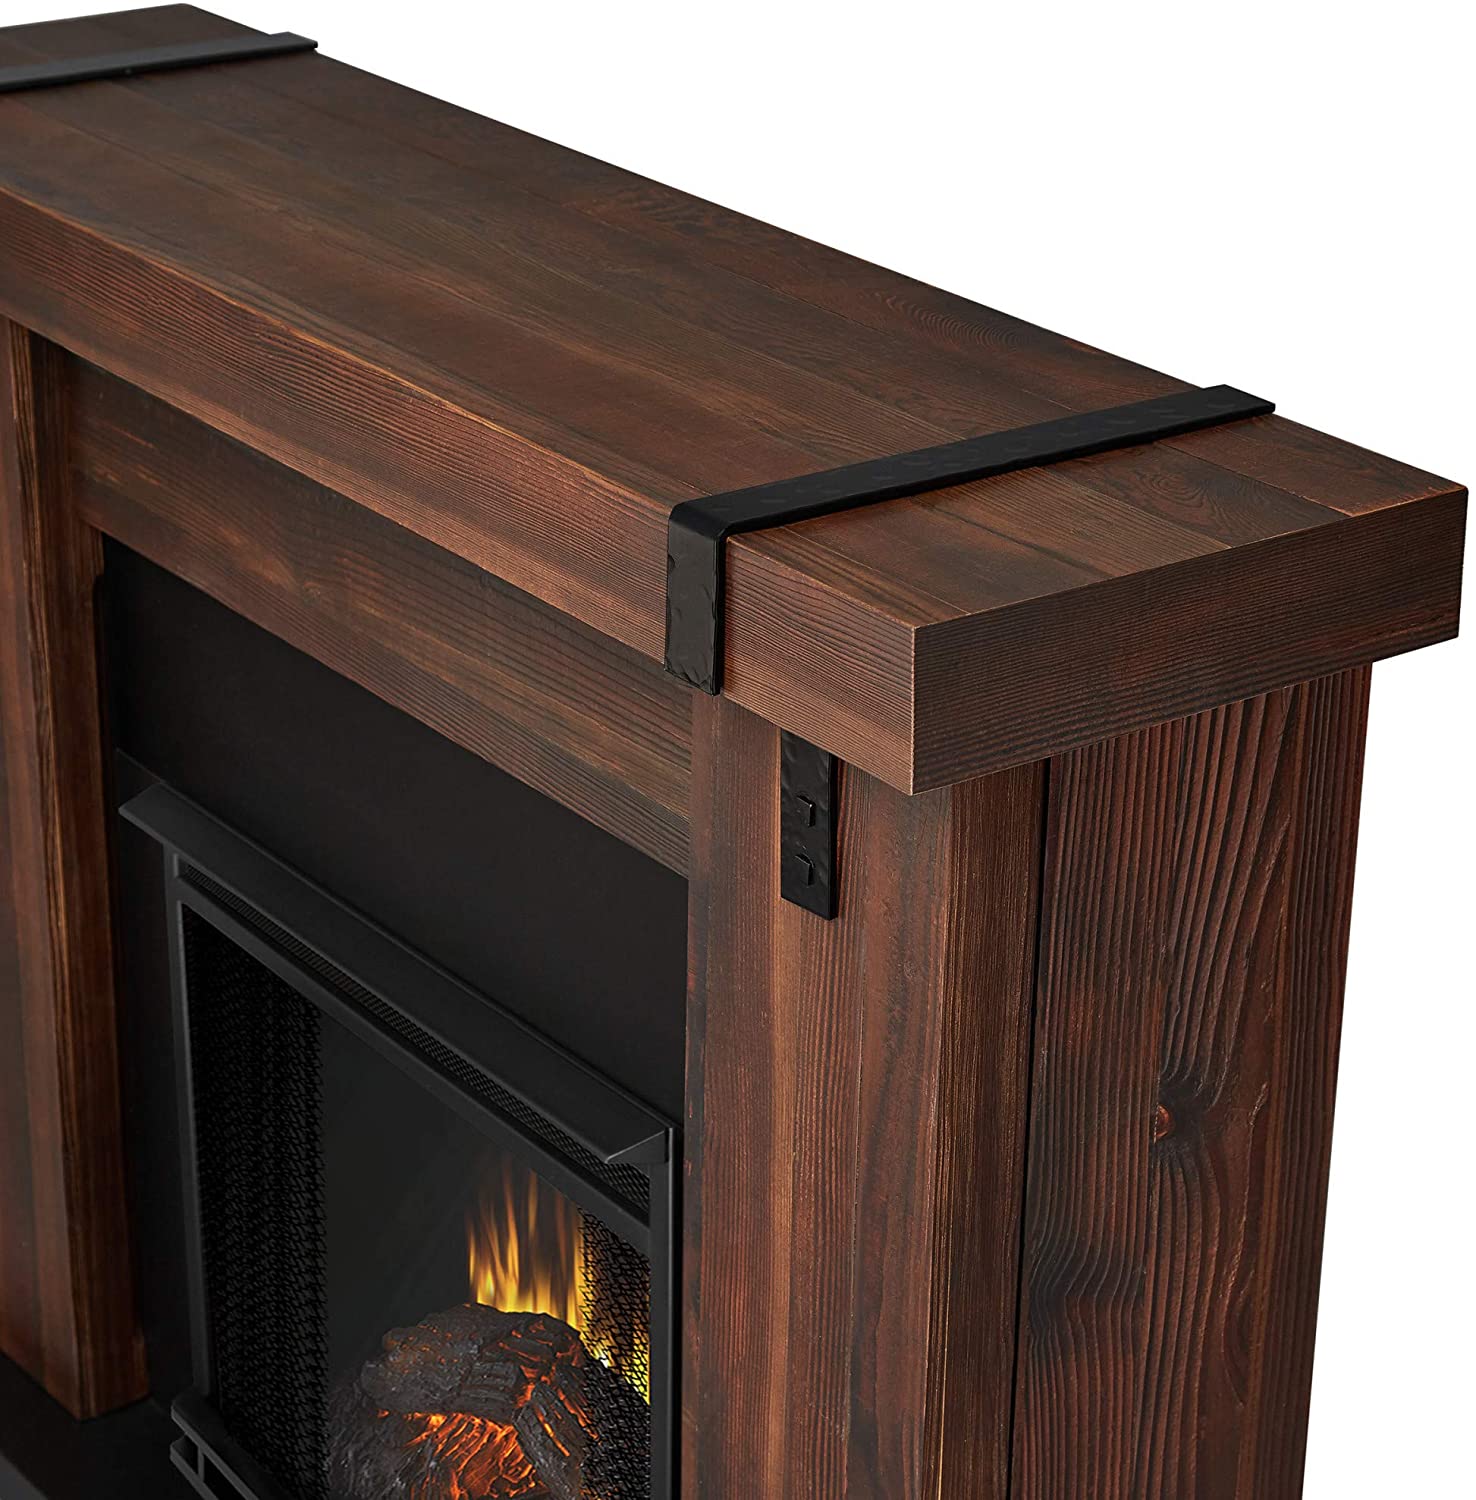 Rustic Wood Fireplace Surround Fresh Real Flame aspen Electric Fireplace Barn Wood Grey